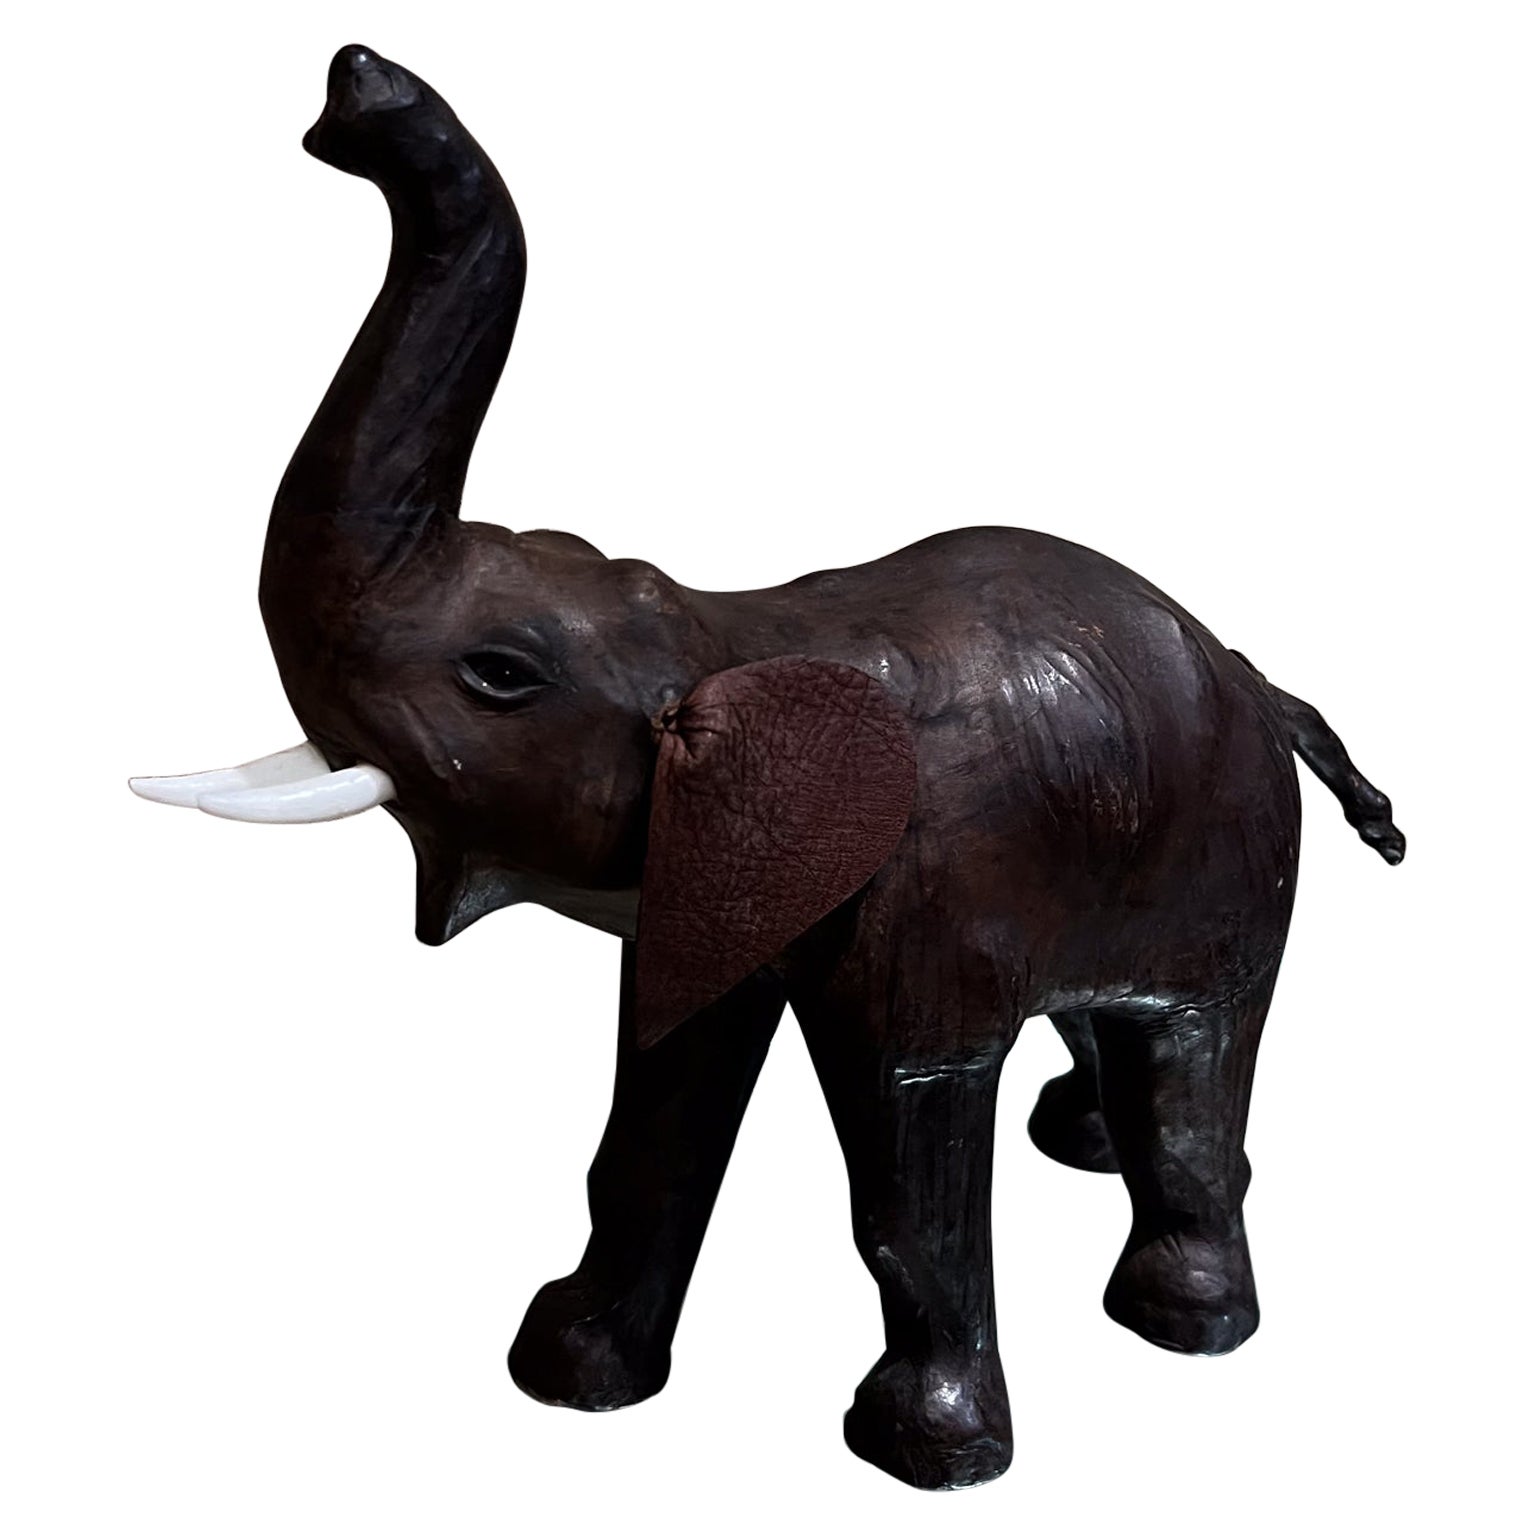 1960s Modern Leather Elephant Table Sculpture